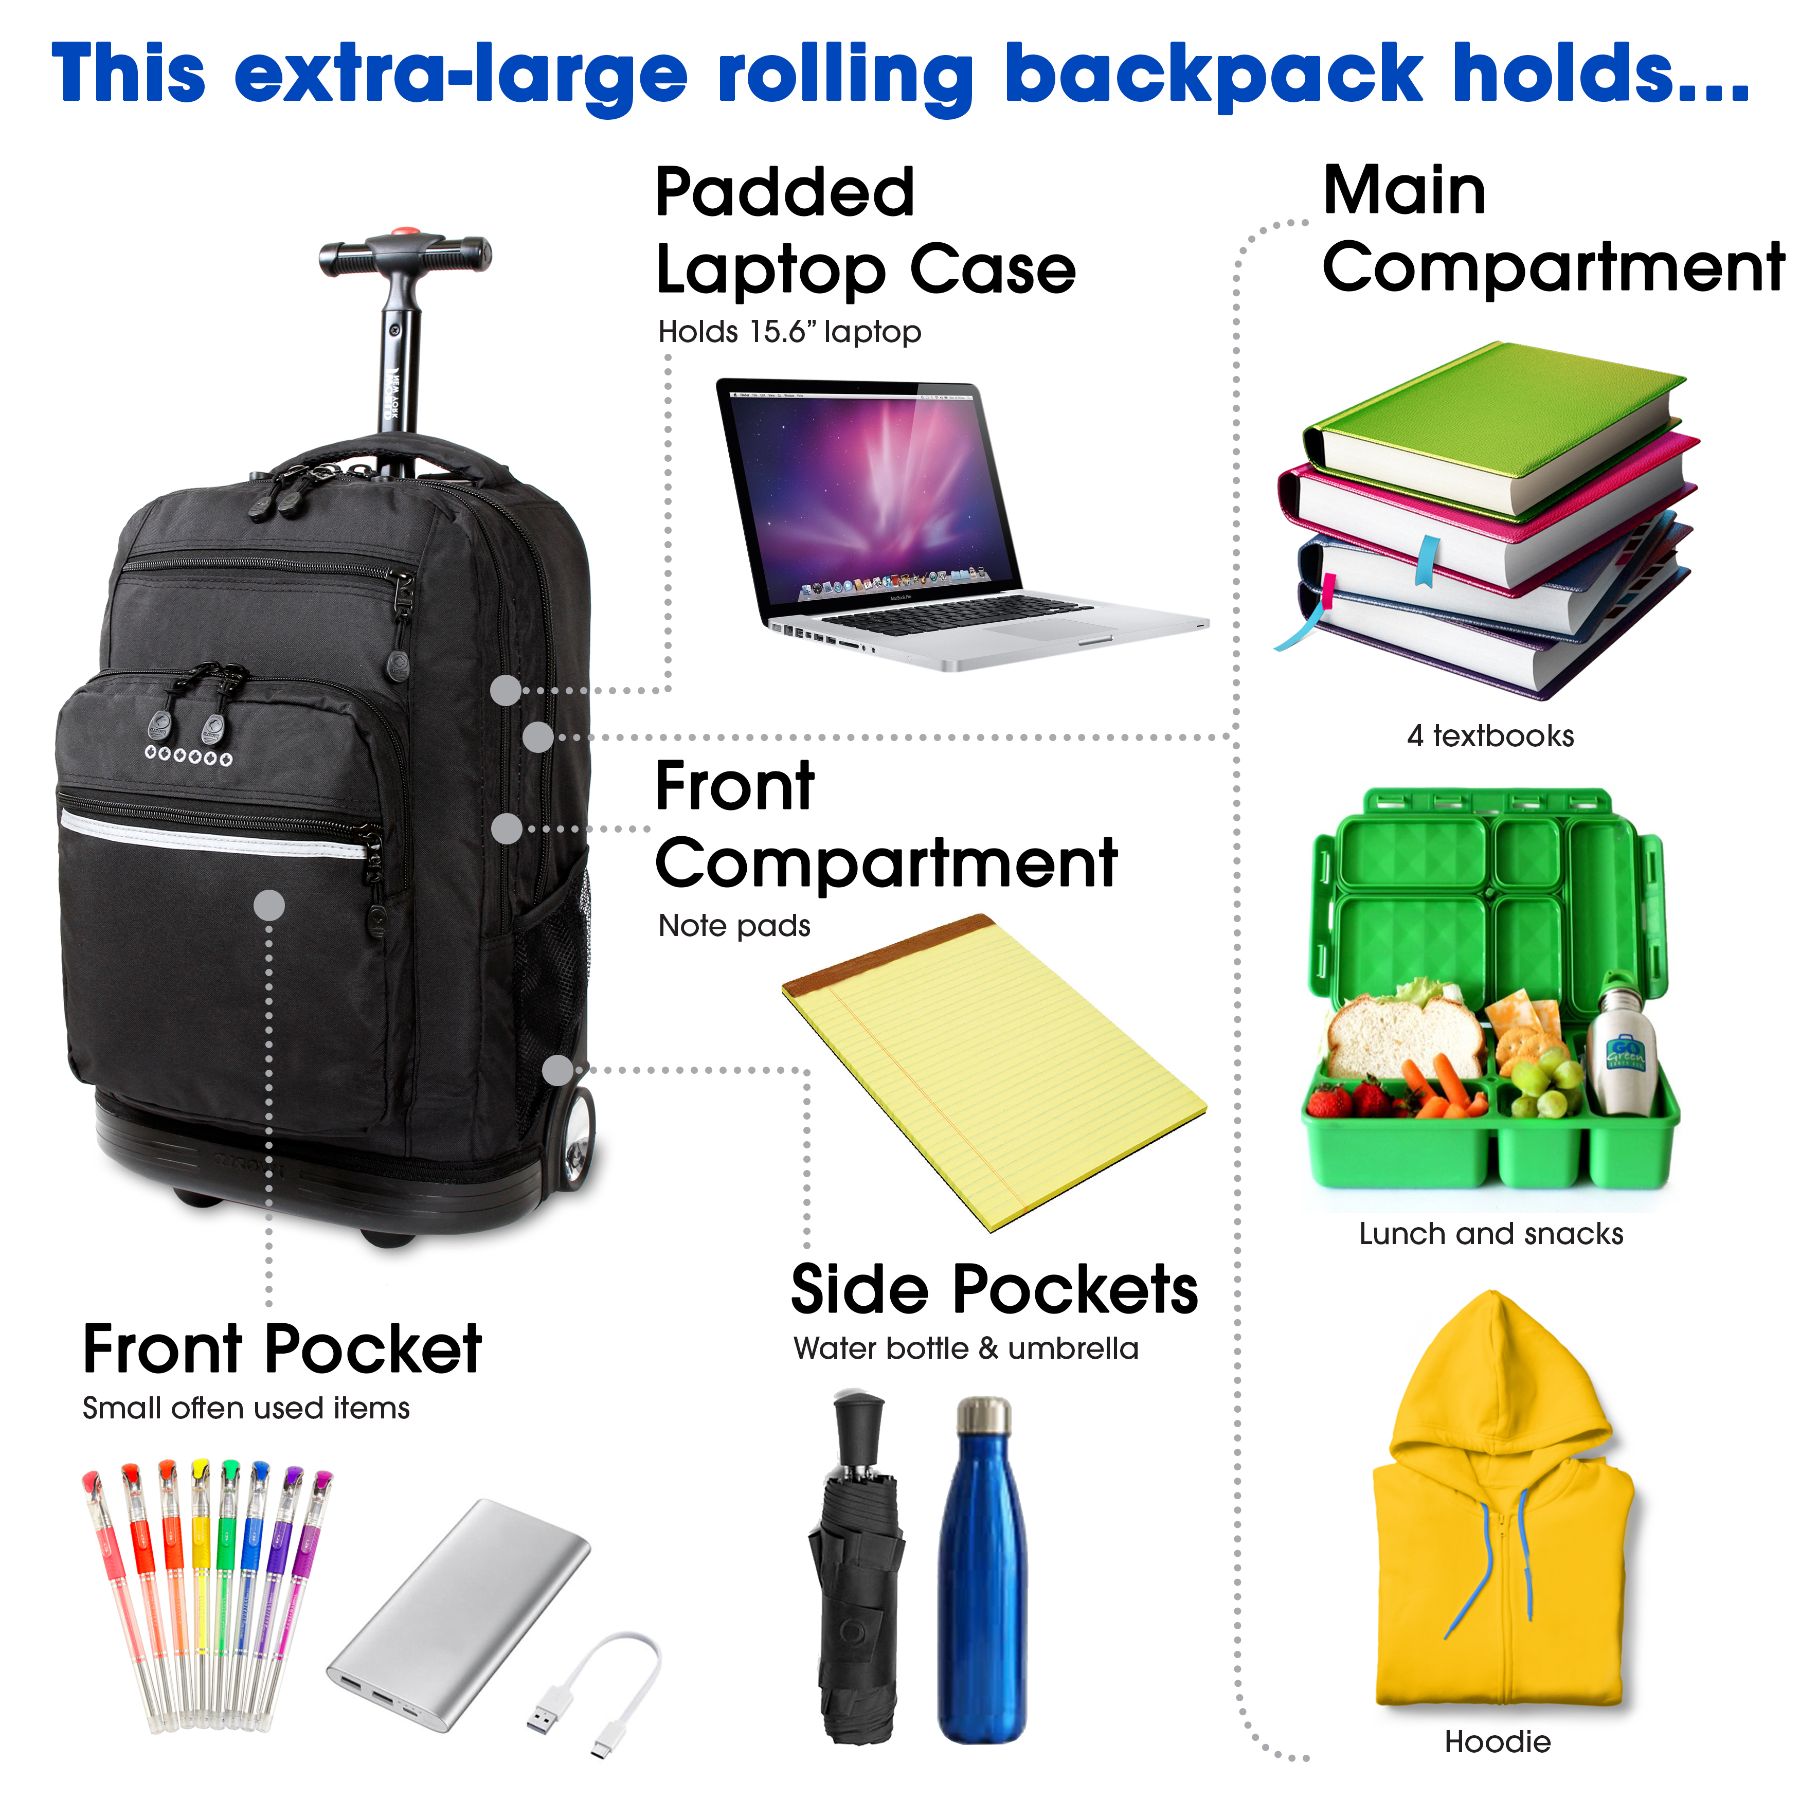 J World Unisex Sundance 20" Rolling Backpack with Laptop Sleeve for School and Travel, Black - image 4 of 5